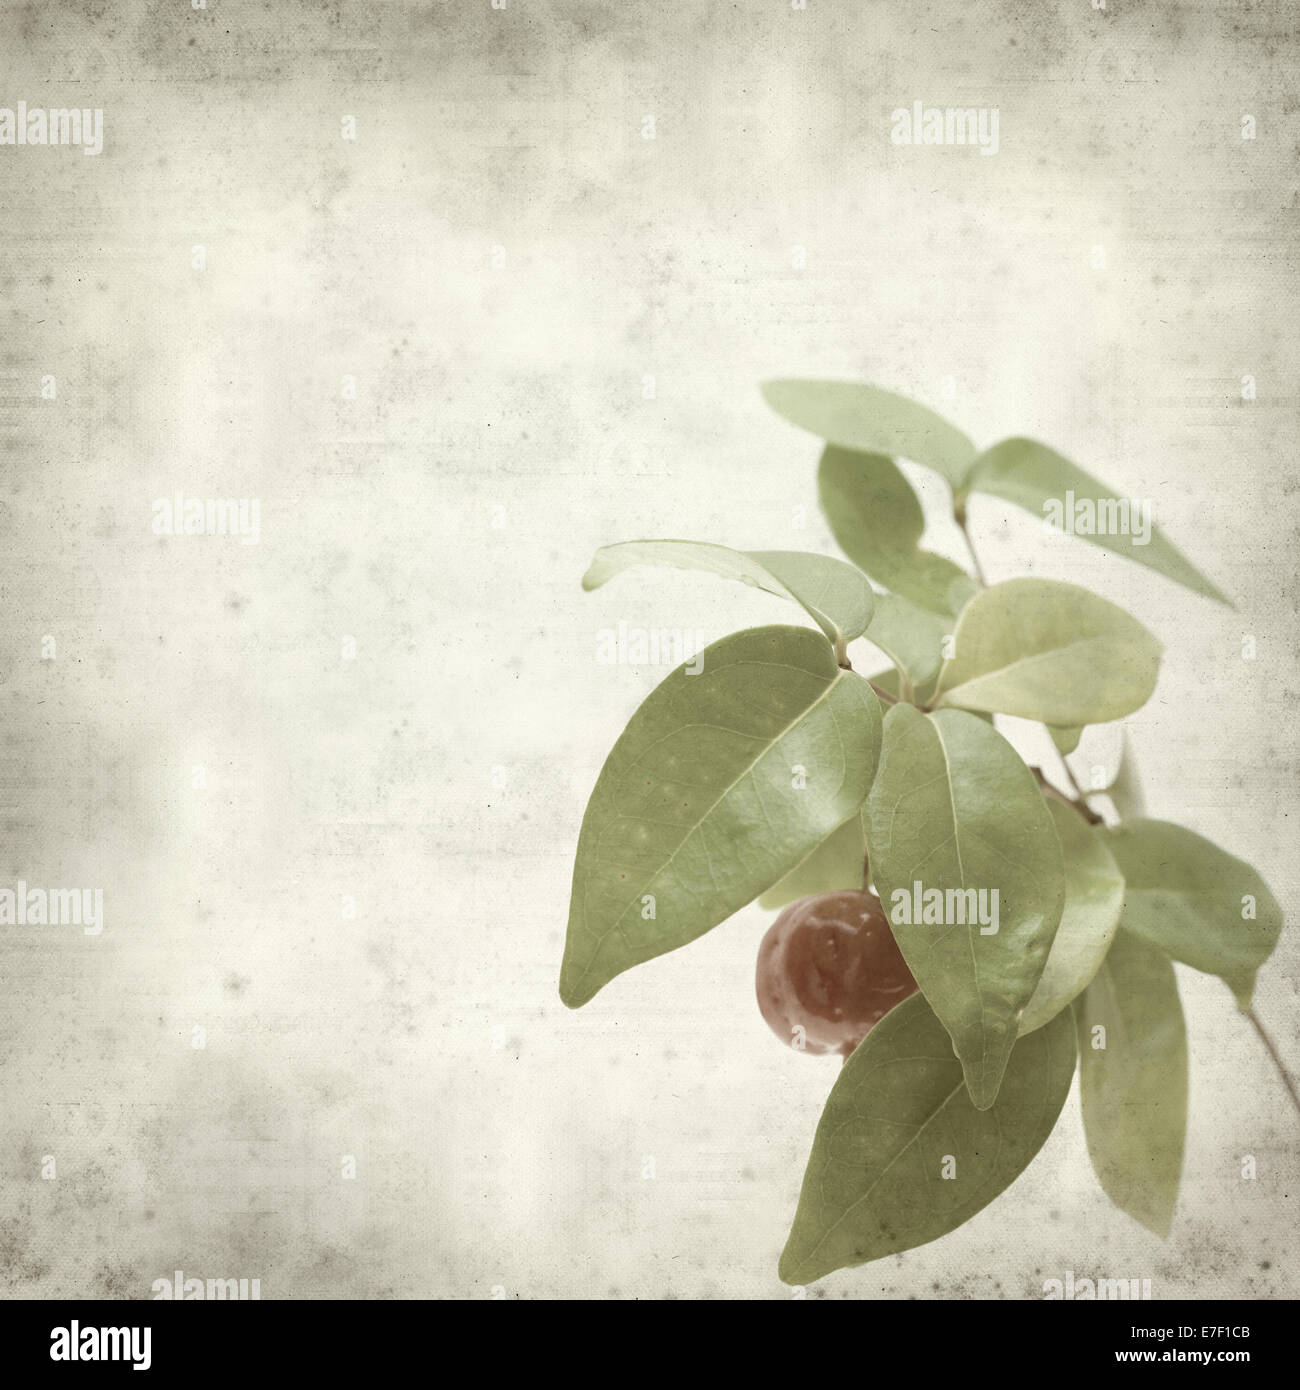 textured old paper background with Eugenia uniflora fruit Stock Photo